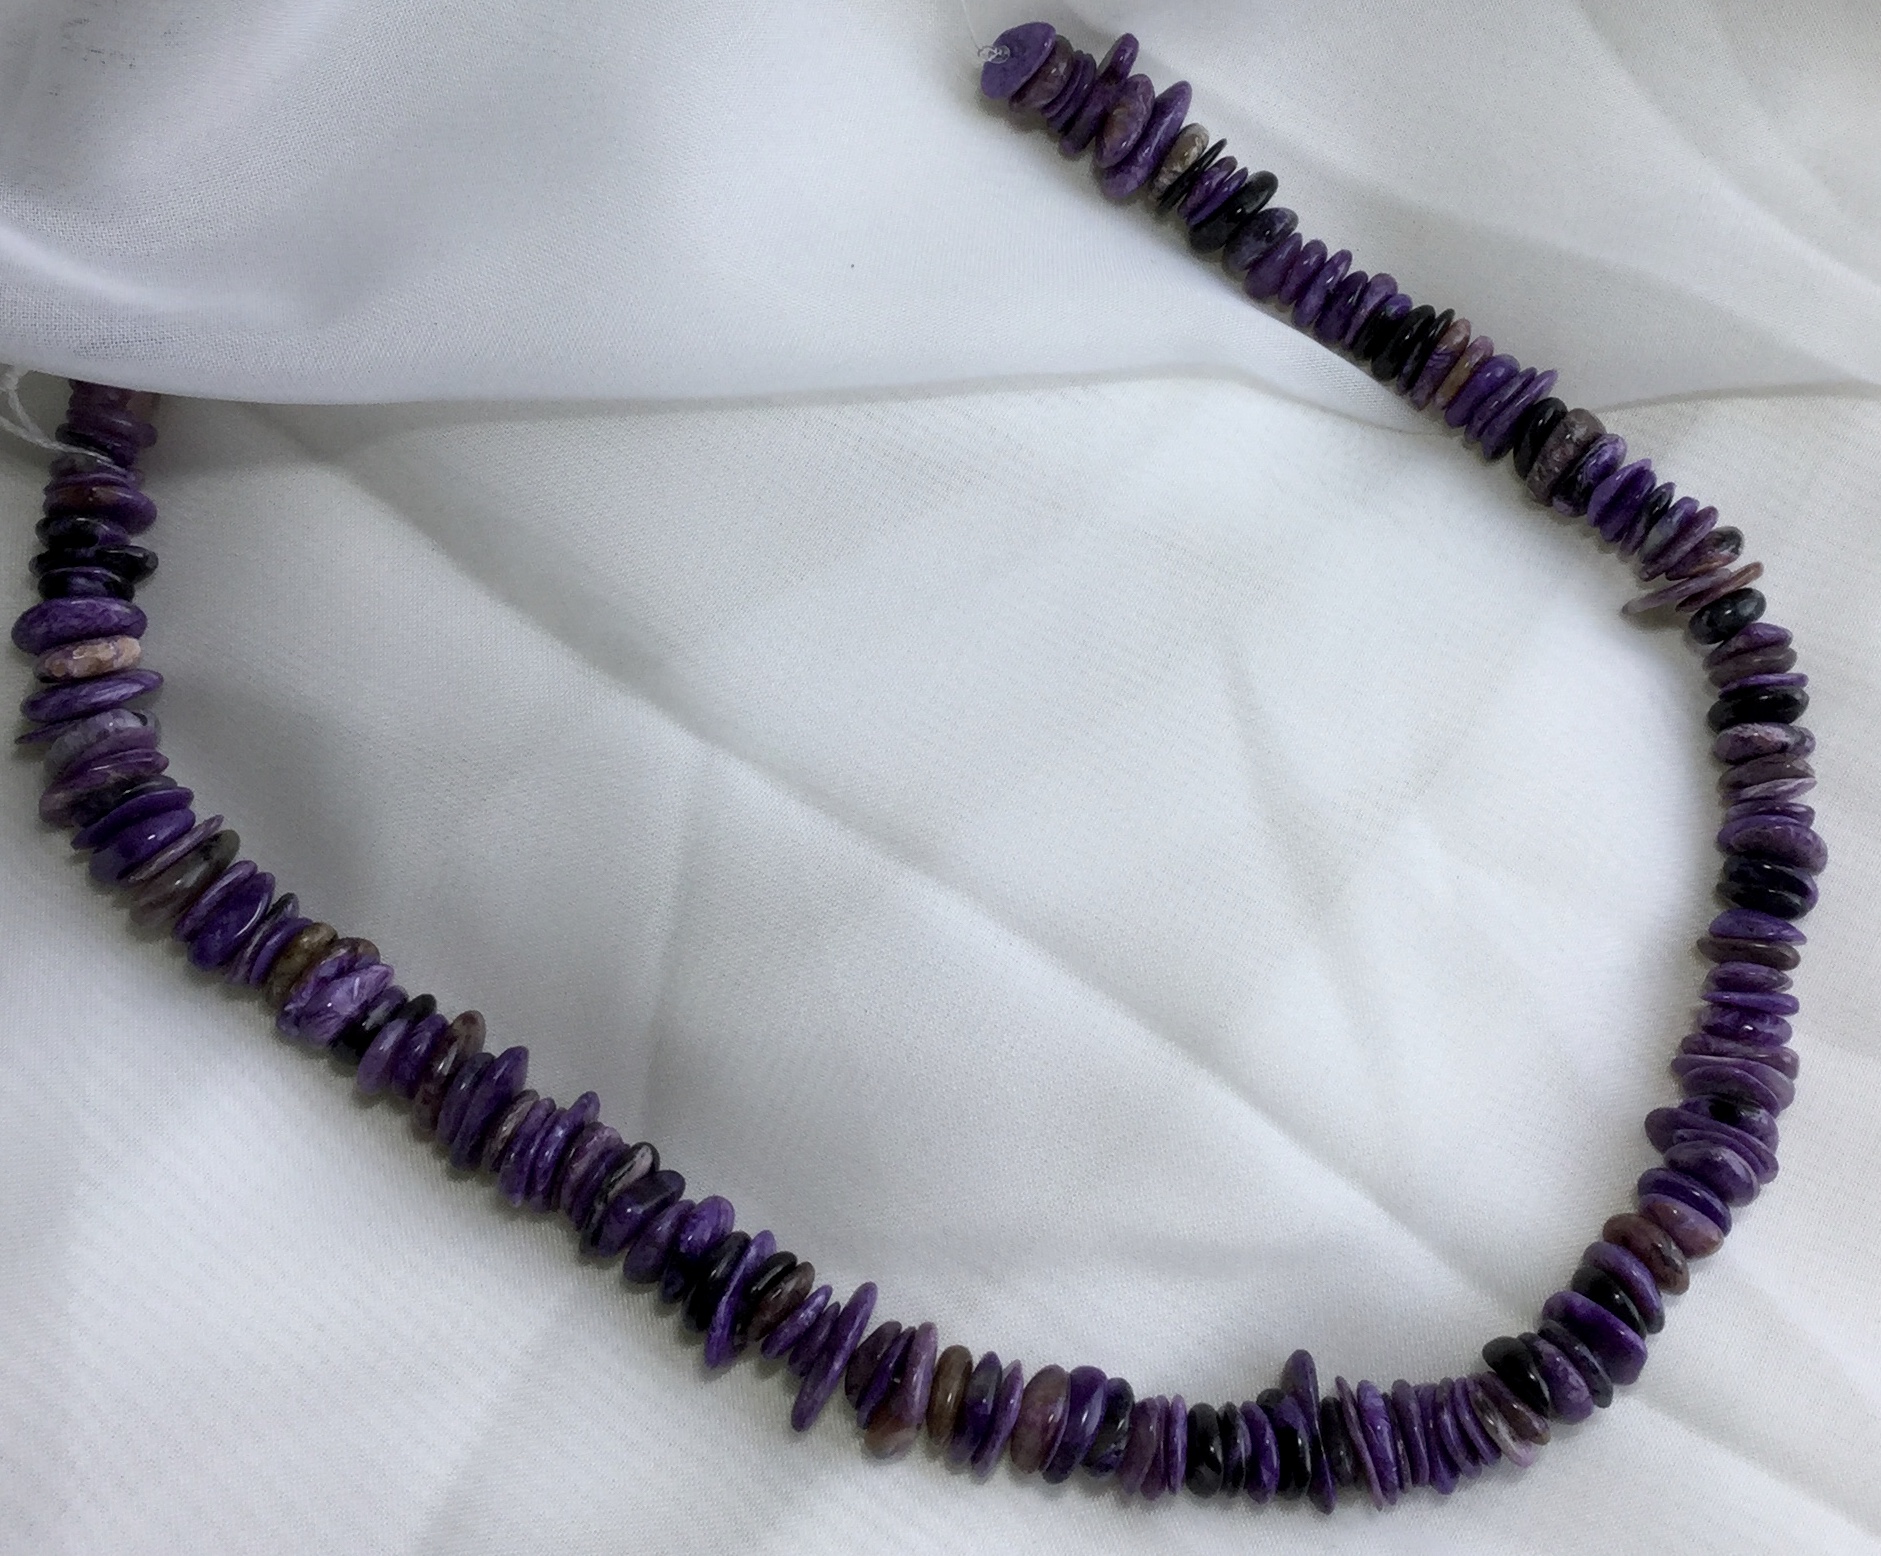 Charoite 300 cts Drilled tumbled slices 38 Cm long - Image 2 of 3